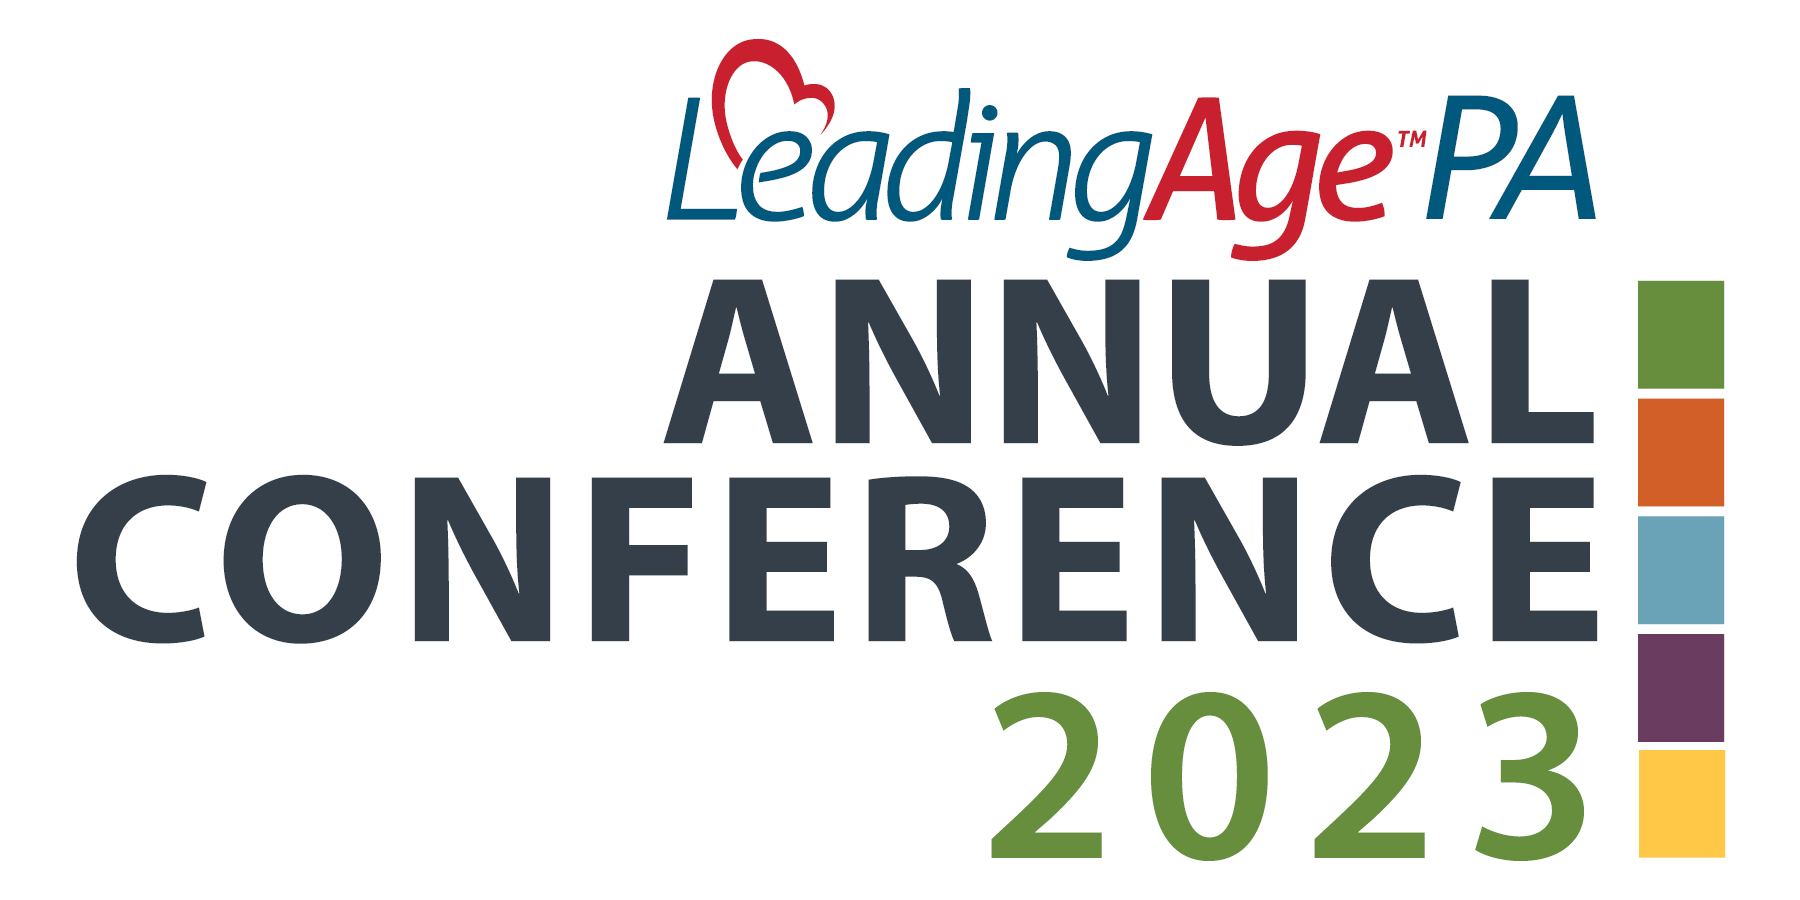 Annual Conference LeadingAge PA